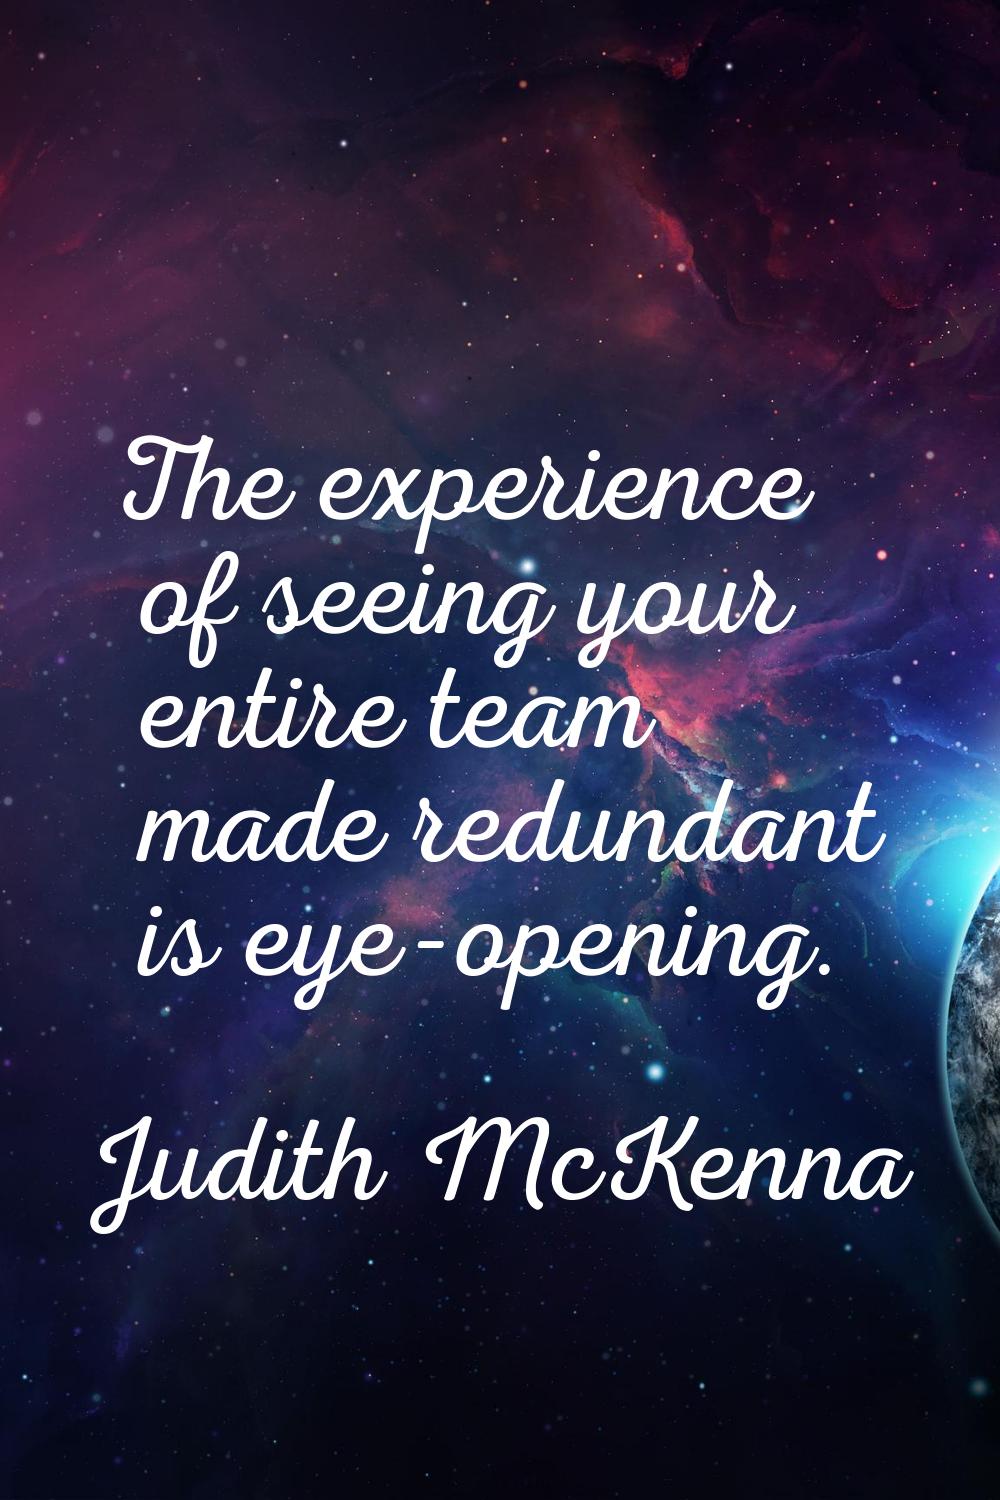 The experience of seeing your entire team made redundant is eye-opening.